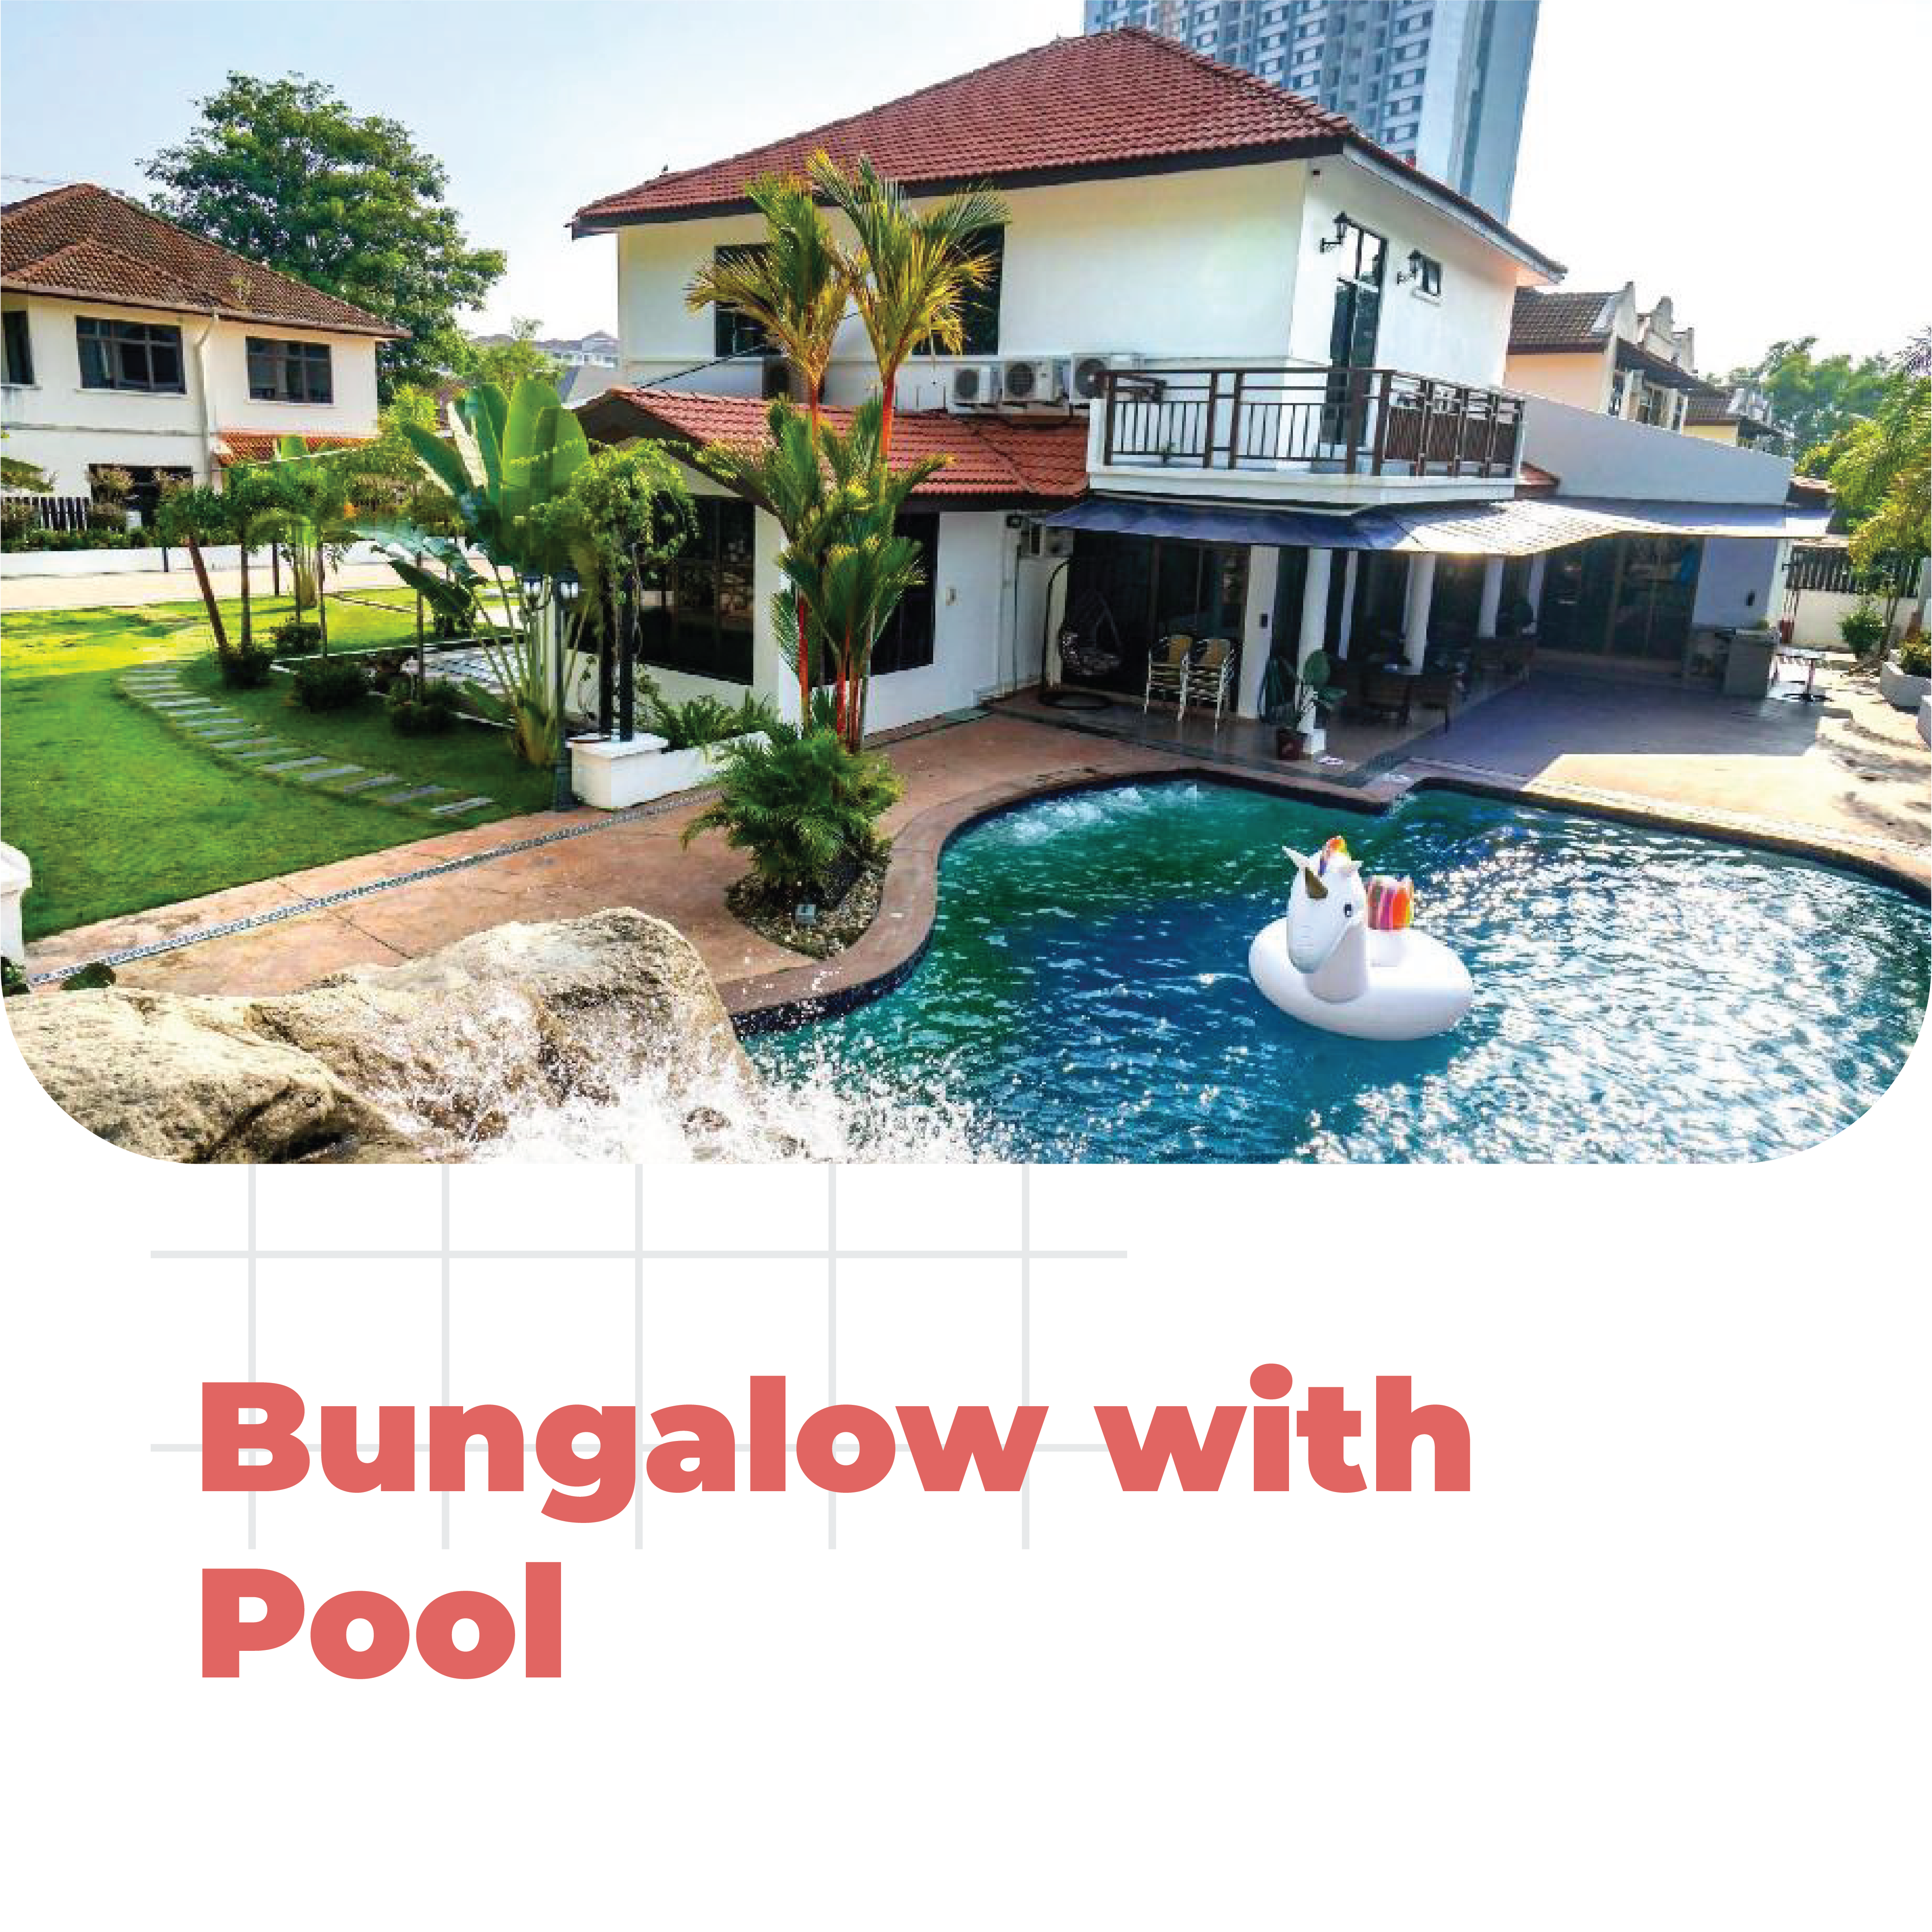 Bungalow with Pool